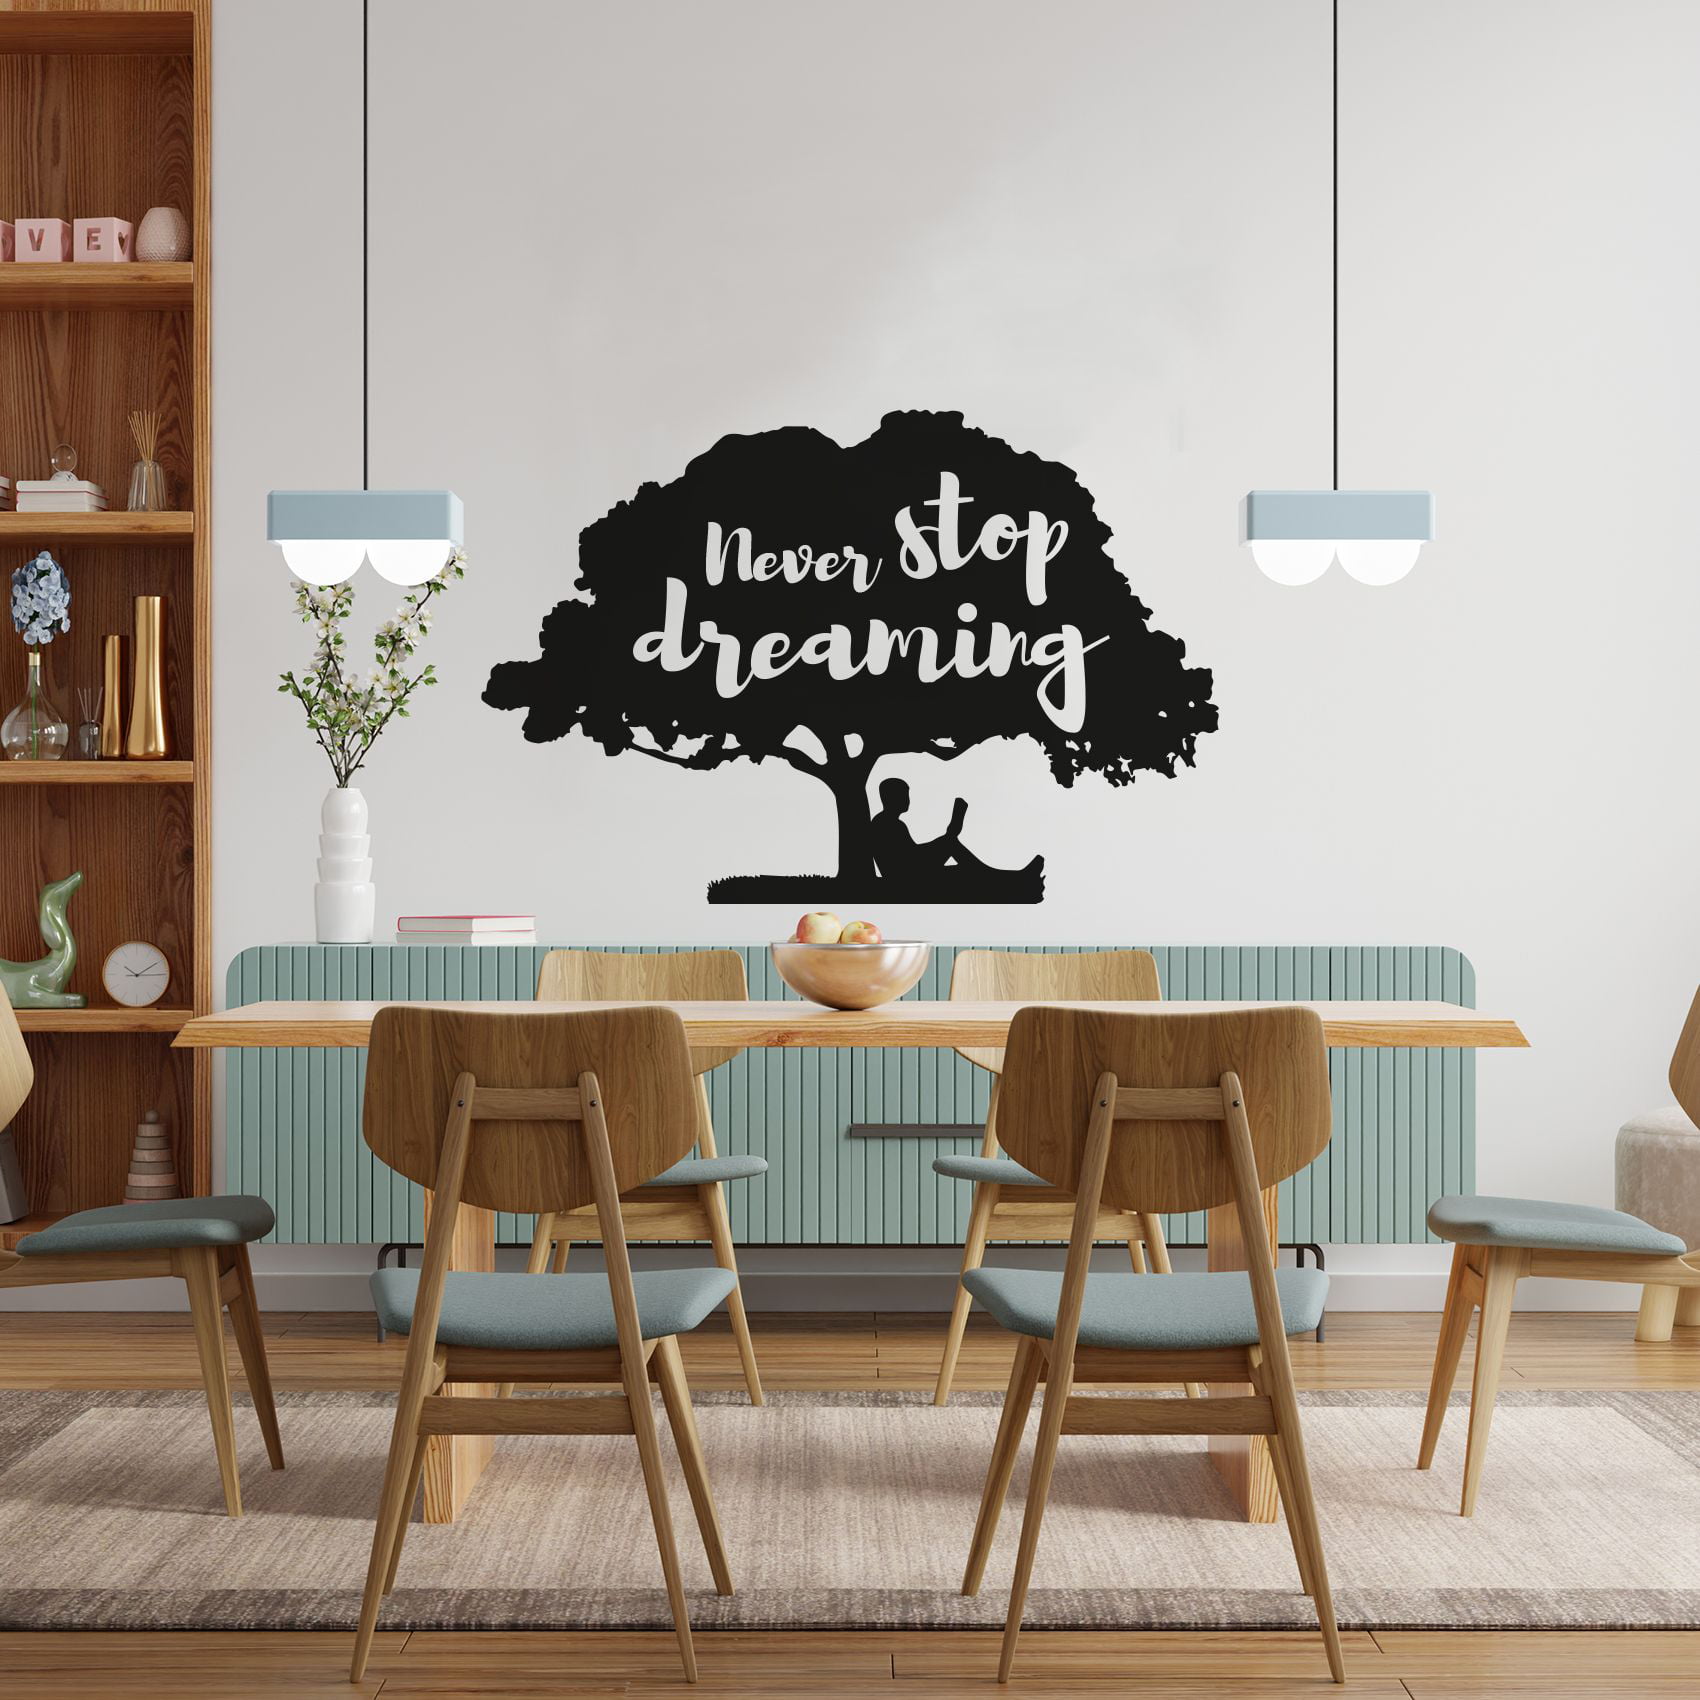 Never Stop Dreaming Wall Stickers Room Quotes Home Decor DIY Art Wall Decal LP 